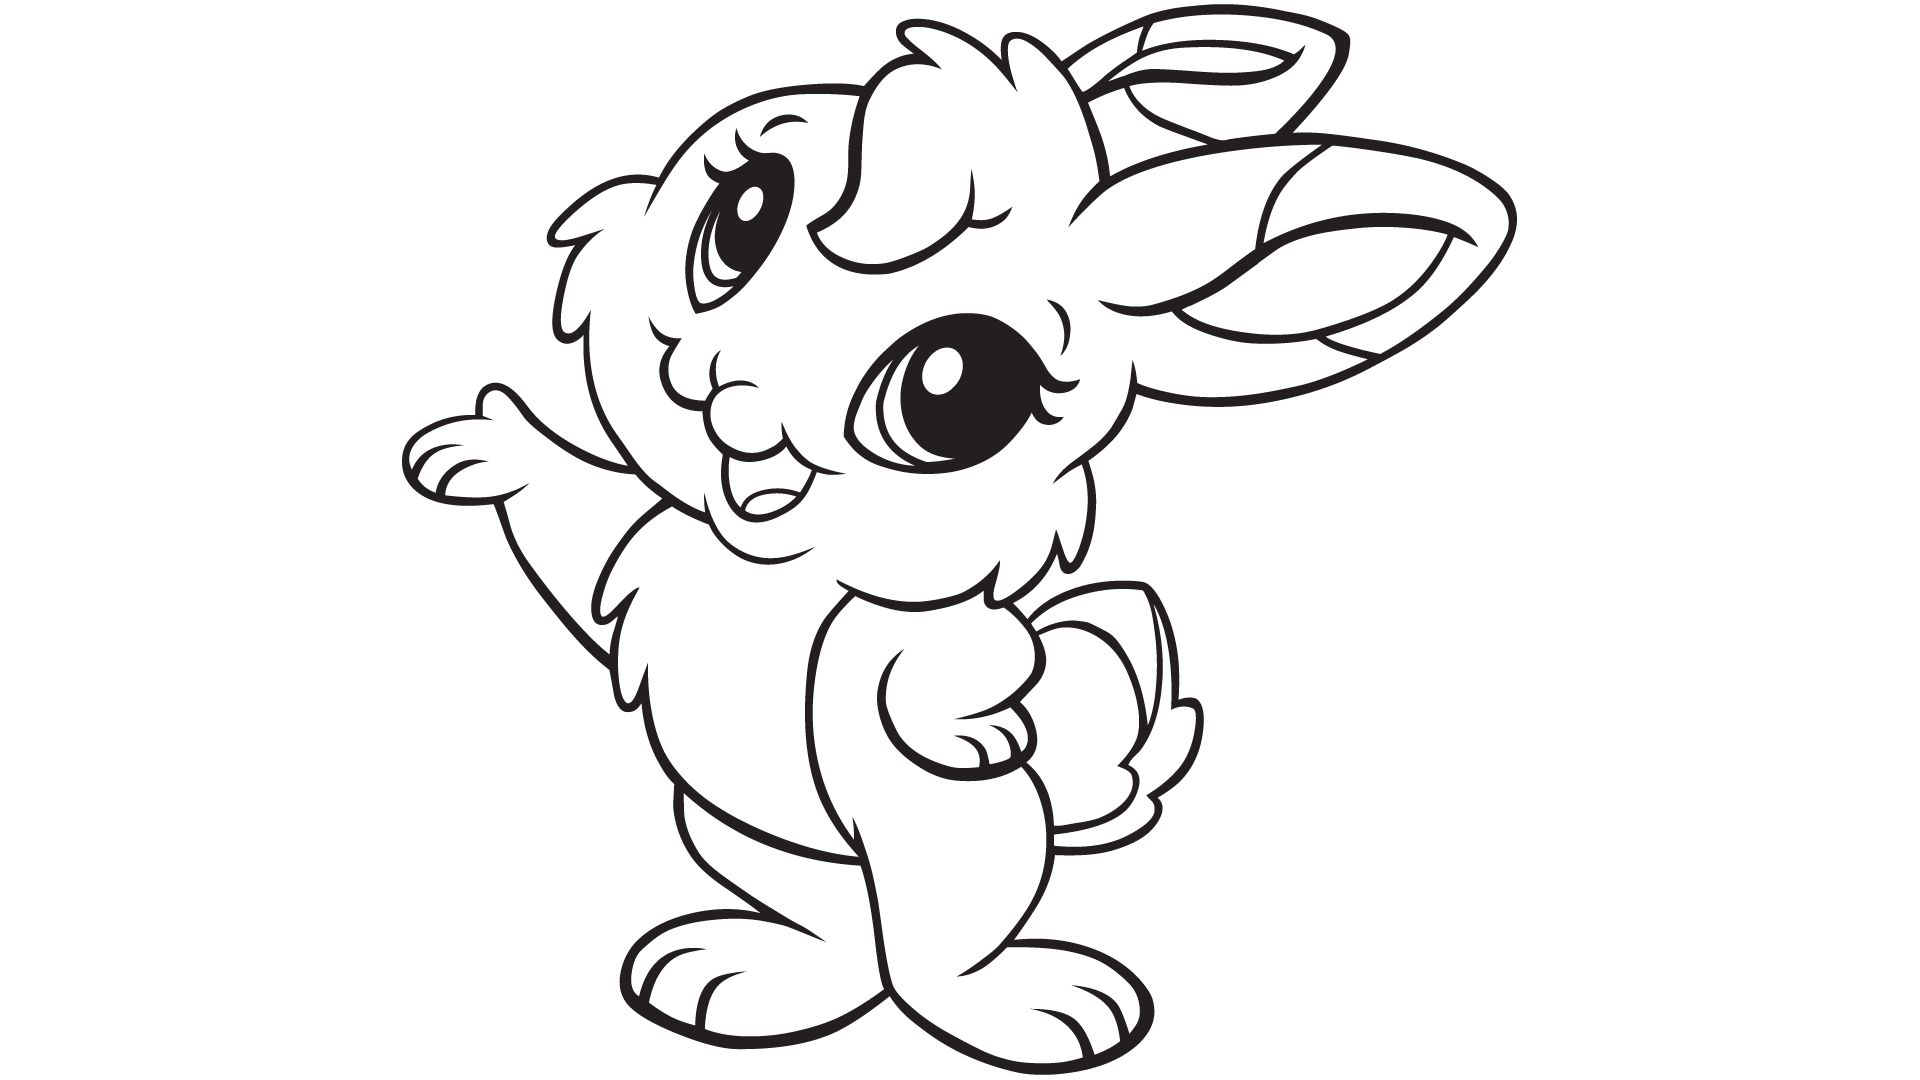 Bunny Rabbit Coloring Pages (20 Pictures) - Colorine.net | 7294